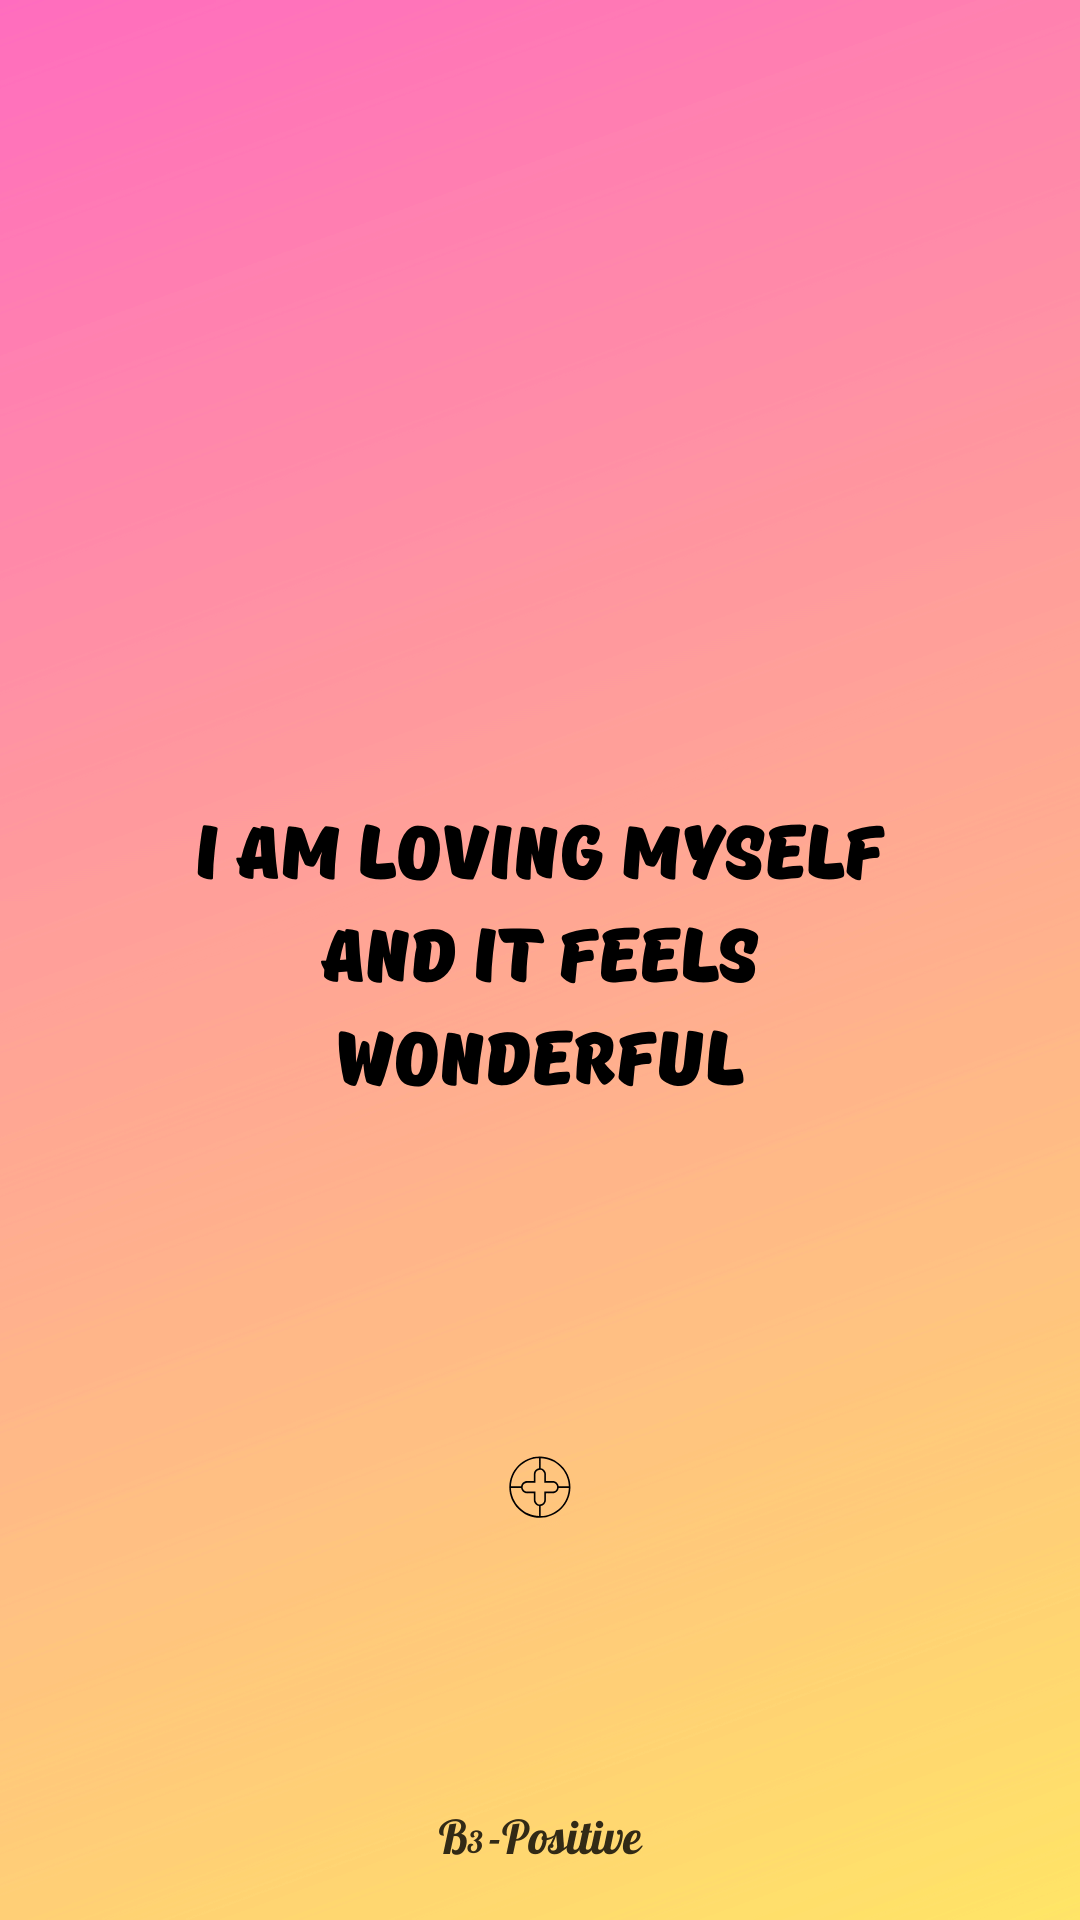 Affirmations For Self Love + Love Yourself Wallpaper 2020